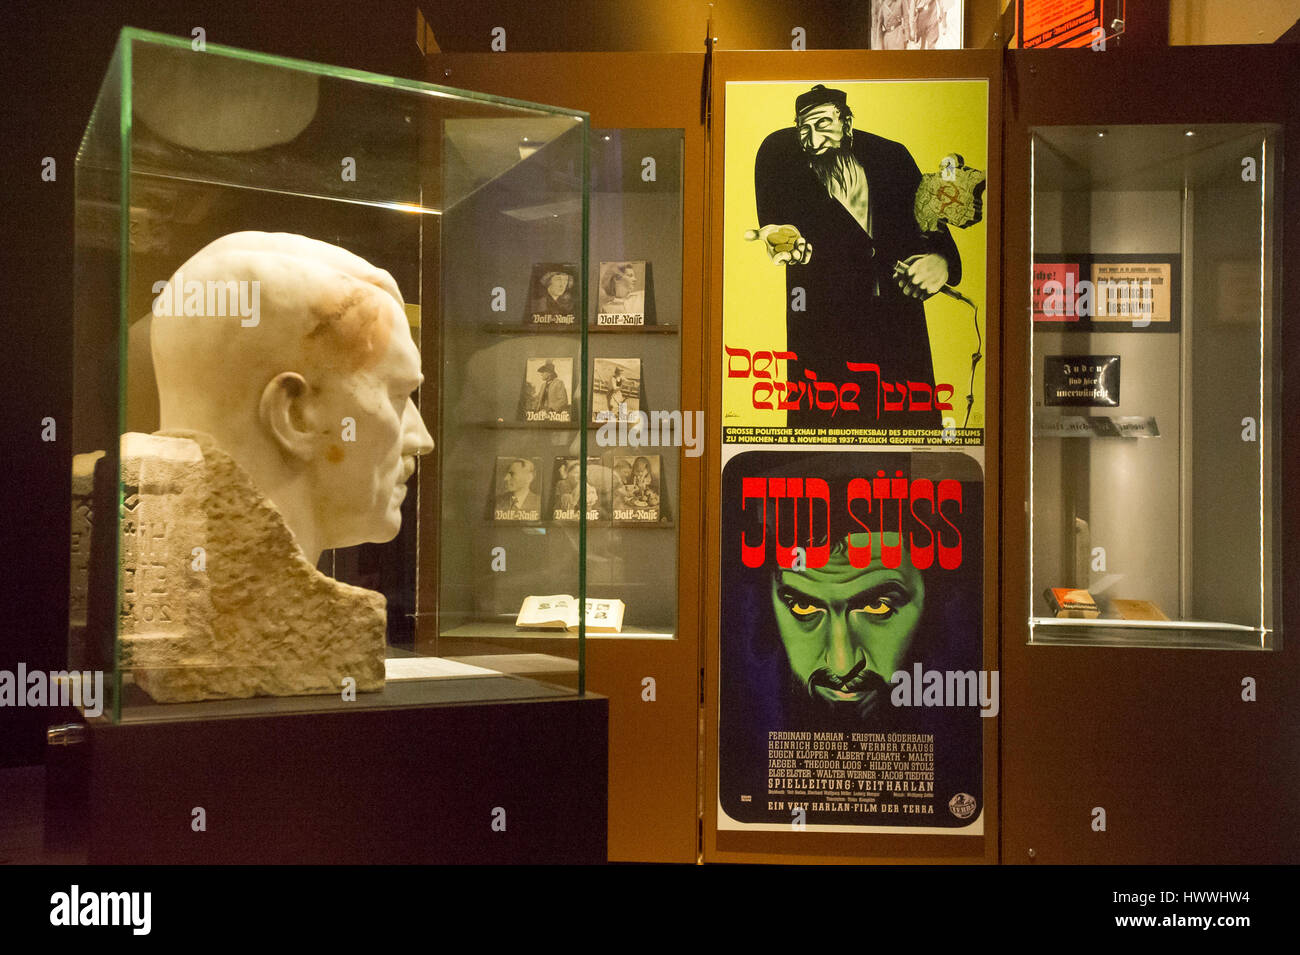 Gdansk, Poland. 23rd March, 2017. Gdansk, Poland. 23rd Mar, 2017. Adolf Hitler marble bust by official sculptor Josef Thorak and poster of anti Jewish propaganda 1940 Nazi German movie Jud Suss showed on exhibition of the Museum of the Second World War. Museum was opened on 23 March 2017 in Gdansk, Poland. Gdansk Museum is the biggest and the newest museum in Poland. Credit: Wojciech Stróżyk/Alamy Live News Stock Photo